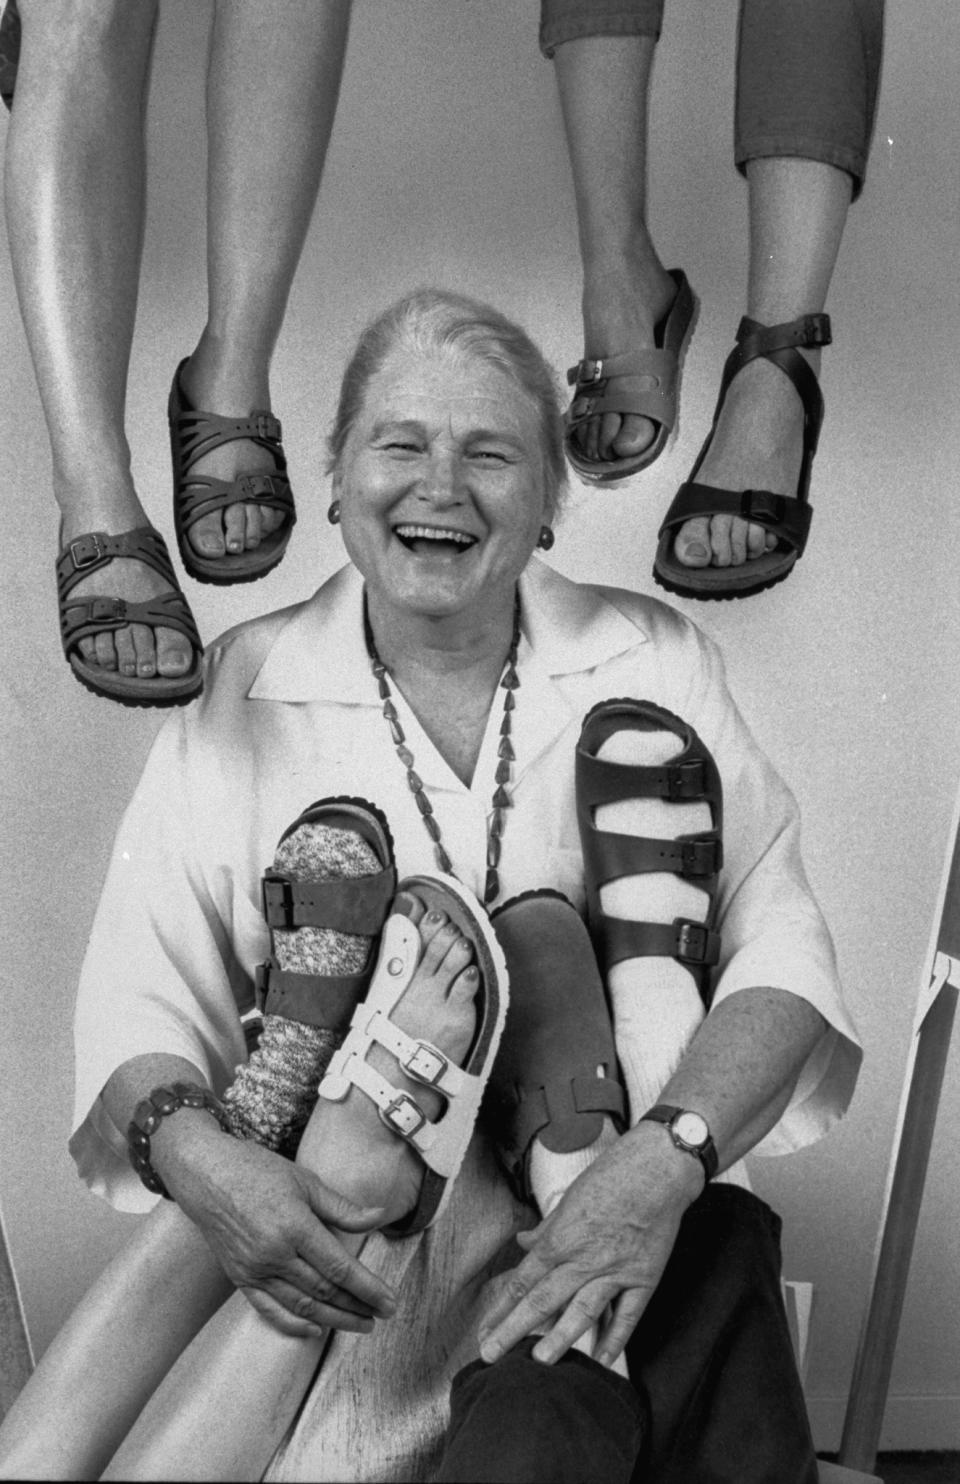 Margot Fraser, importer of Birkenstock Footprint Sandals, posing amidst the dangling feet of four people sporting the many varied styles of this cloddish sandal, at her distribution center.   (Photo by Kim Komenich/Getty Images)